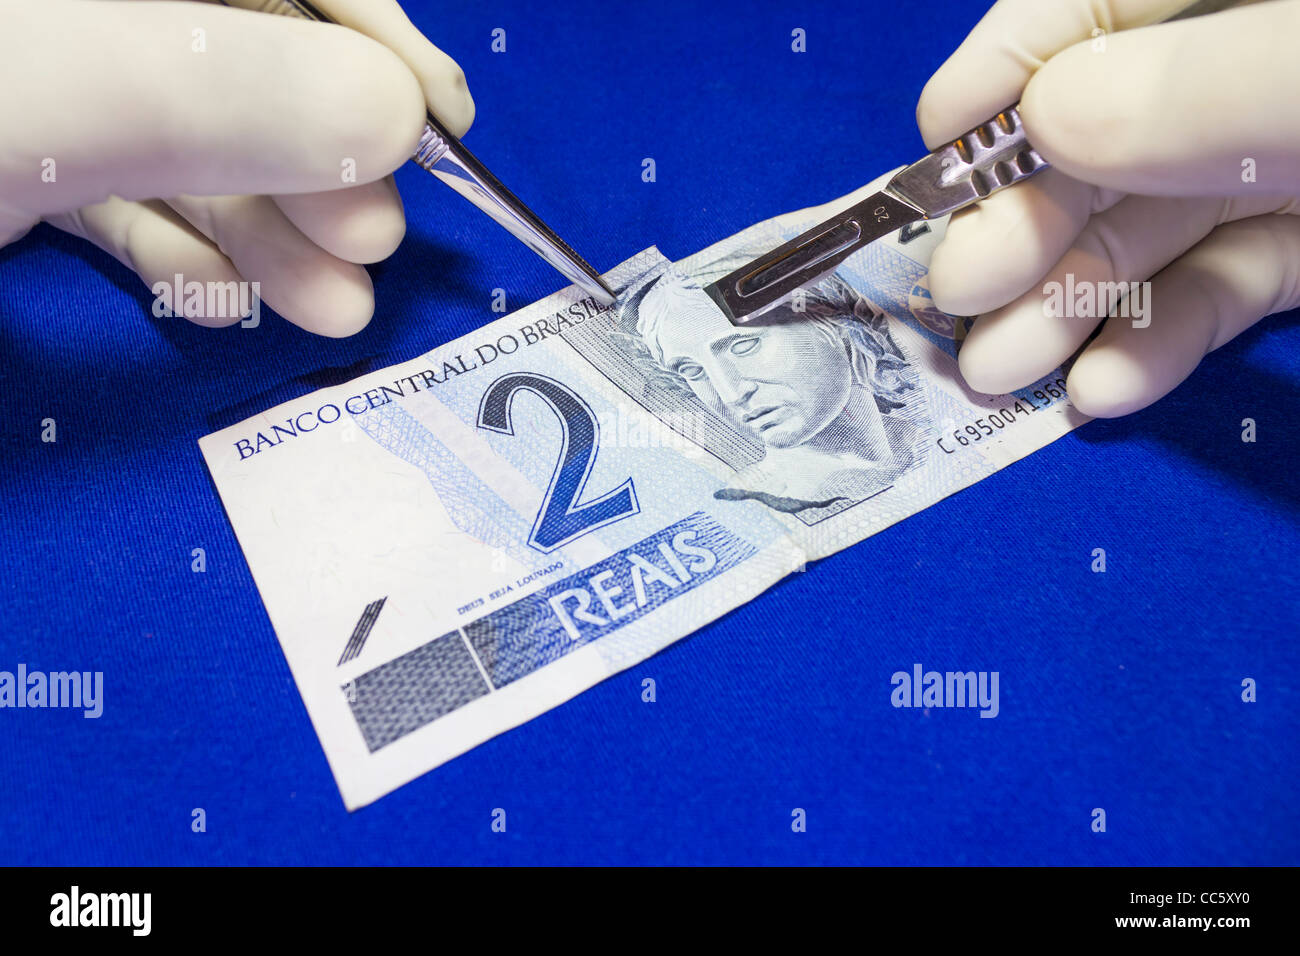 Money surgery - Brazilian real. A surgeon performing a surgical cut in a note with scalpel, tweezers and sterile gloves Stock Photo